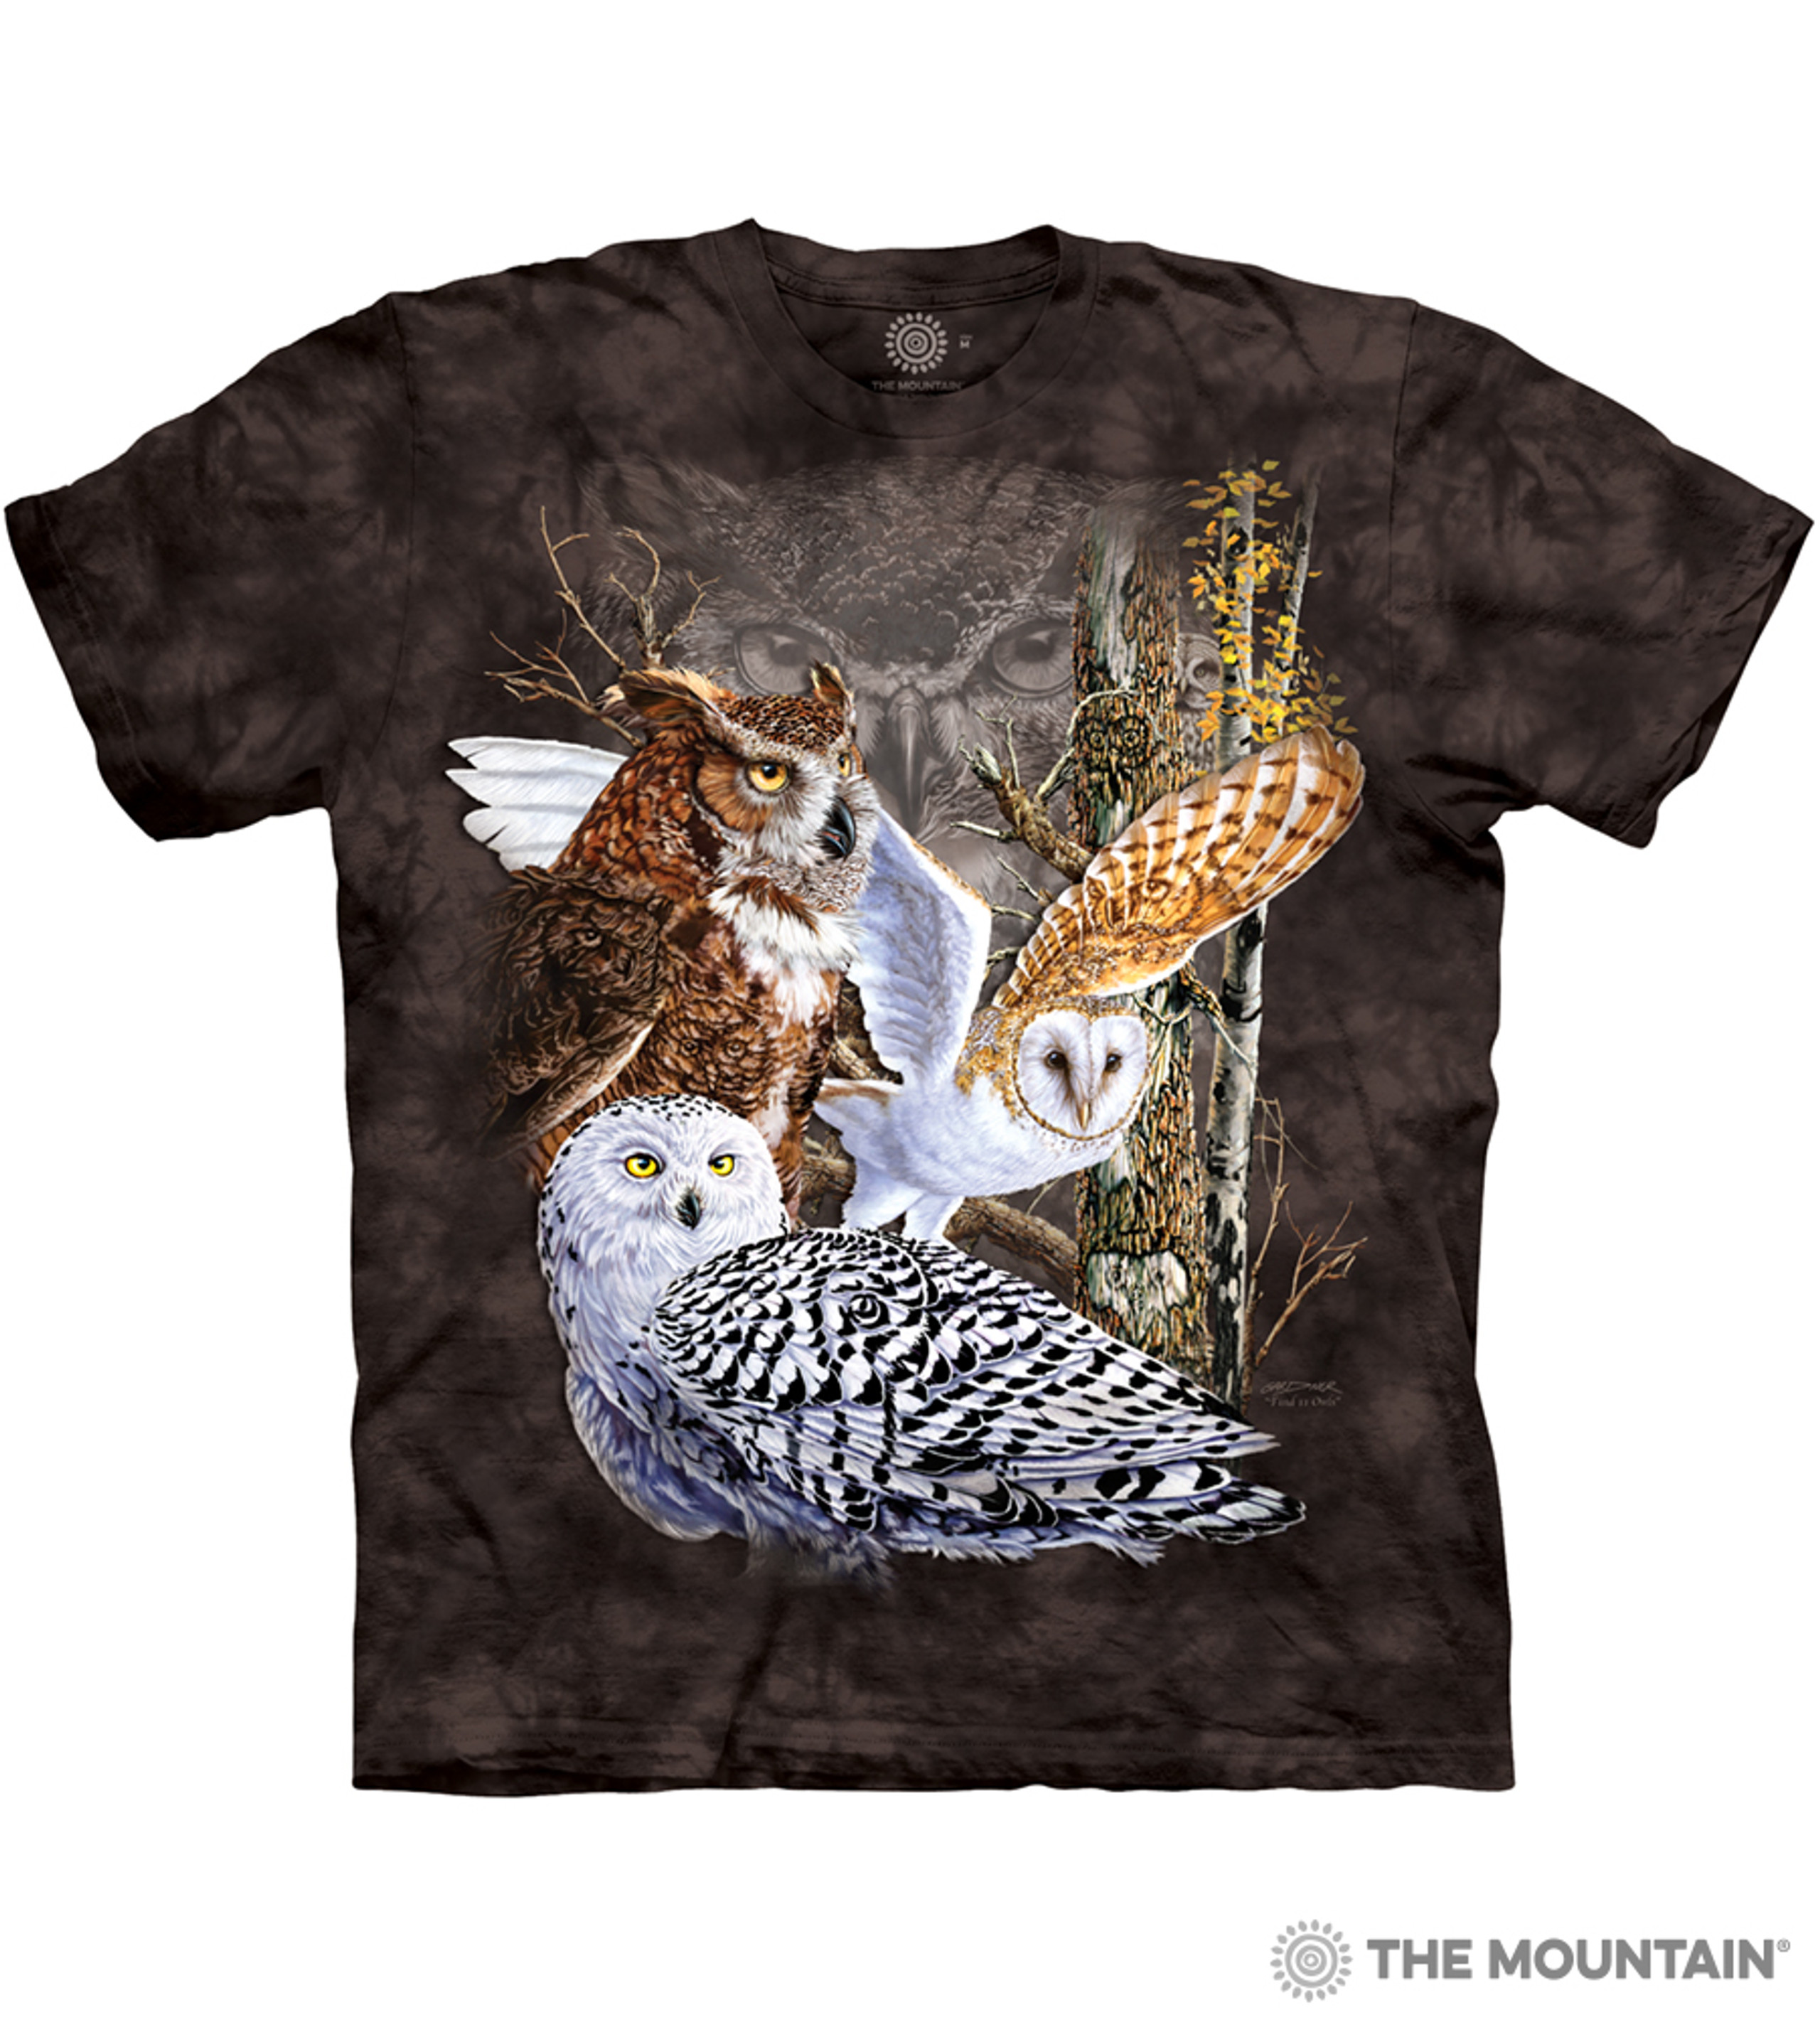 Hidden Images Animal T-Shirts, Pet T Shirts For Humans